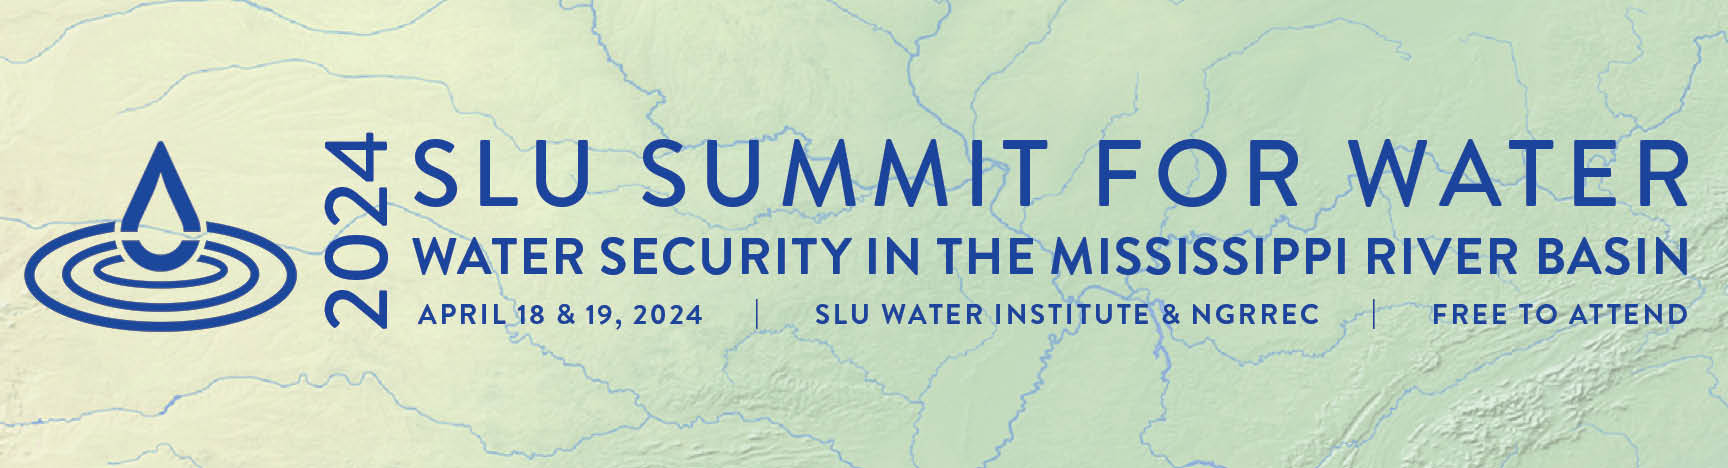 Infographic of letters on a background of green topographical map with blue river lines reading: SLU Summit for Water April 18 - 19, 2024, Water Security in the Mississippi River Basin, SLU WATER Institute & NGRREC, Free to Attend